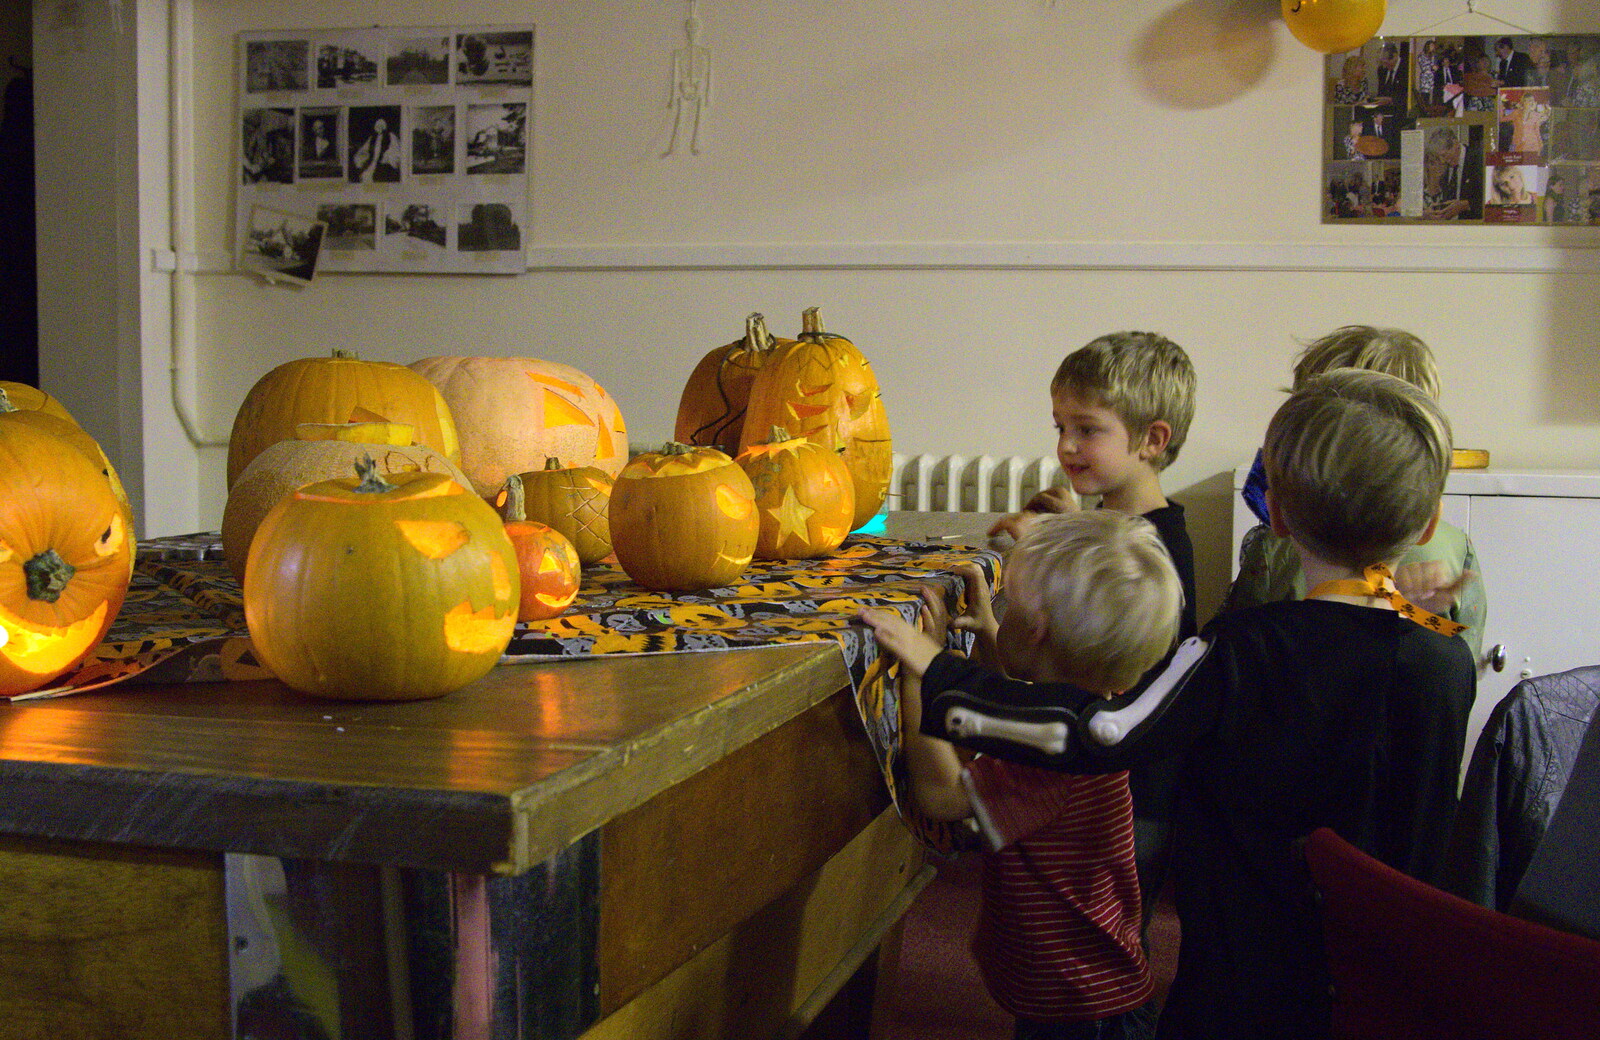 A pile of pumpkins on the table from A Halloween Party at the Village Hall, Brome, Suffolk - 31st October 2014